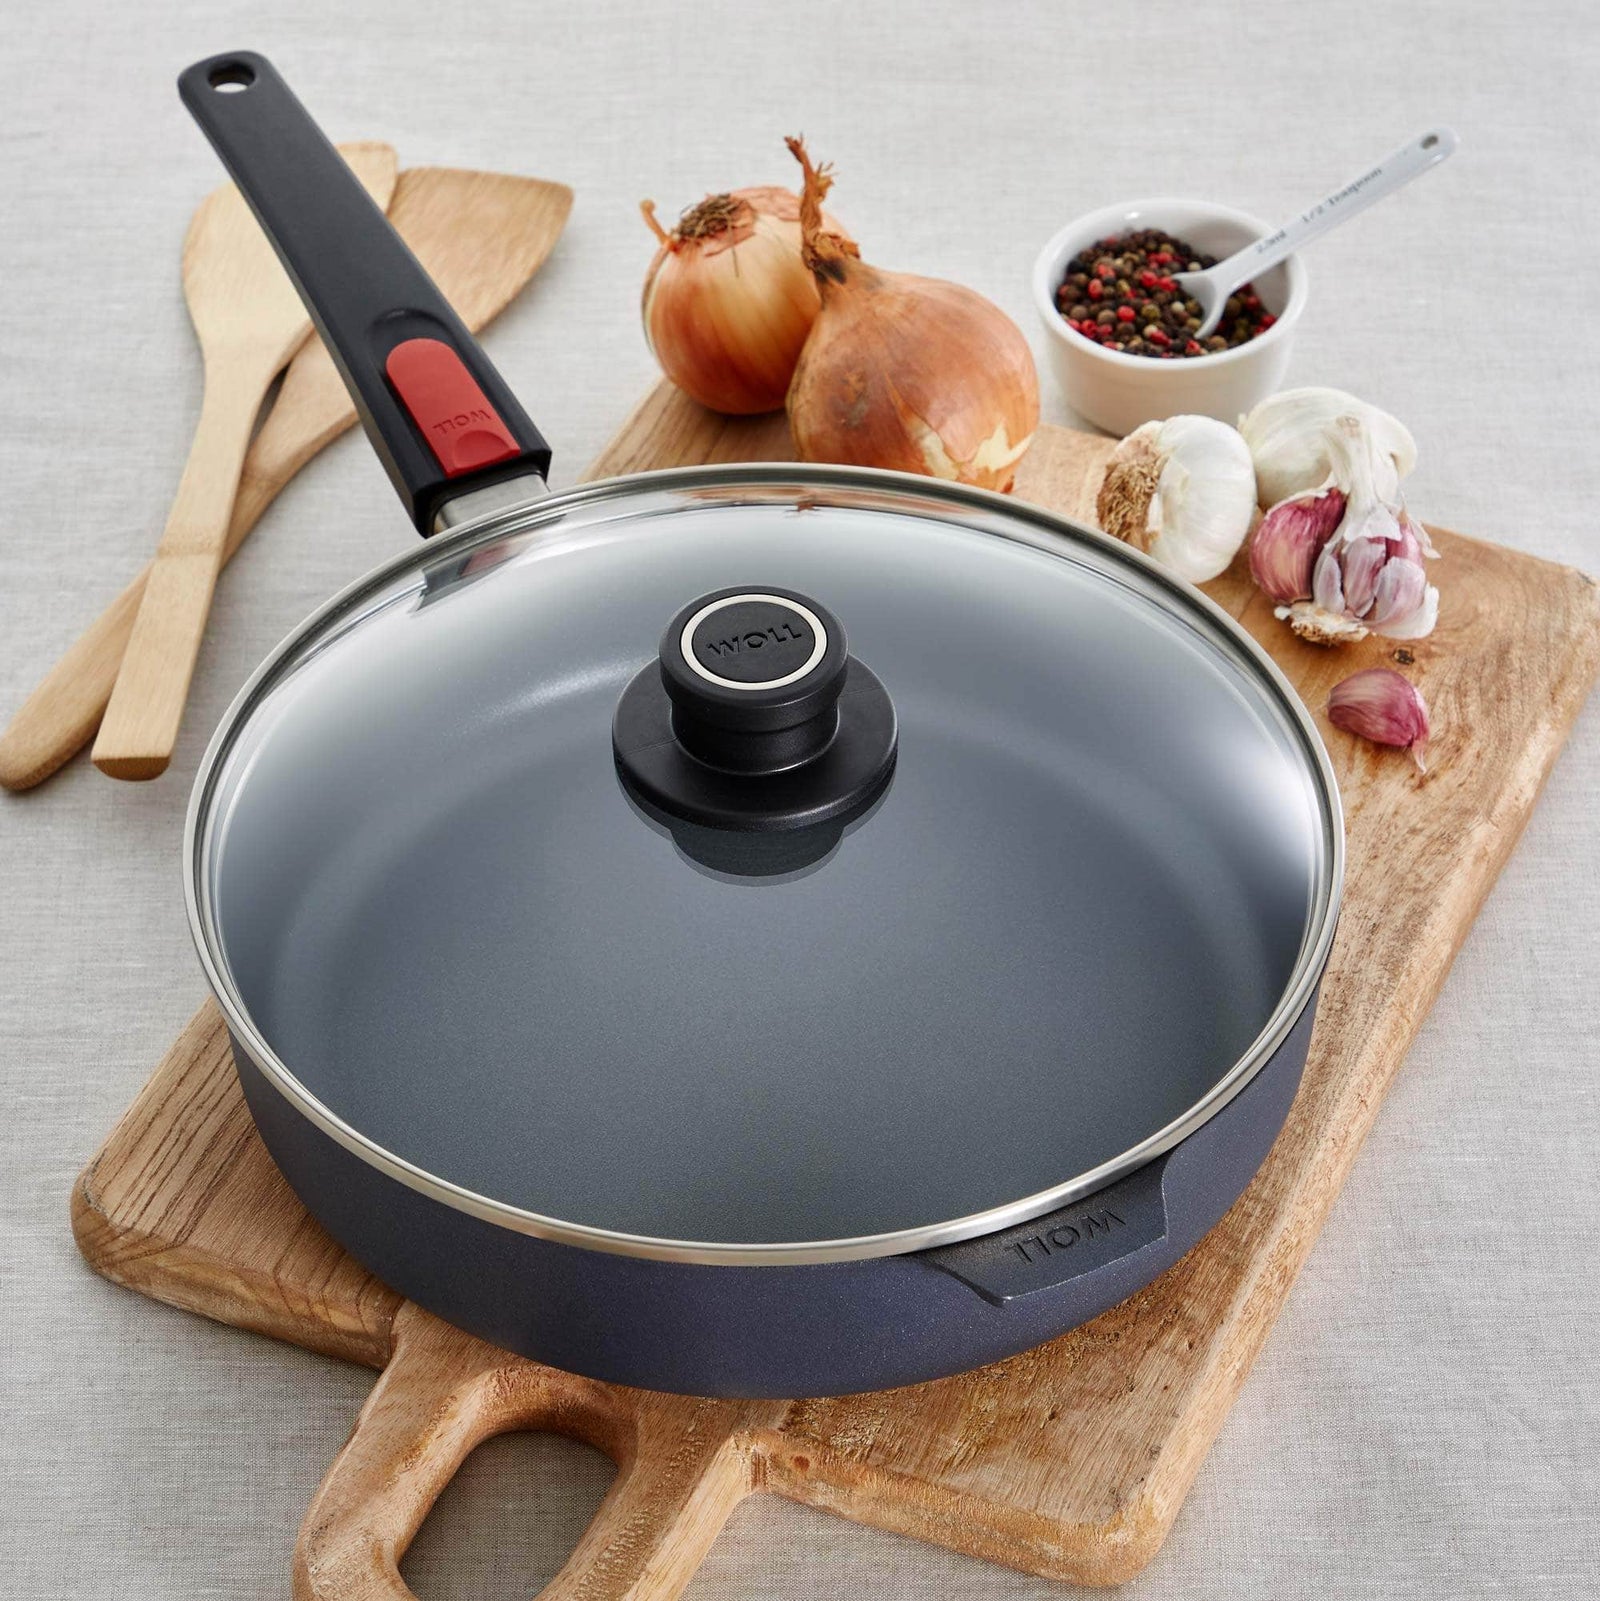 Shallow Frying Pan, 'Eco Lite' by WOLL